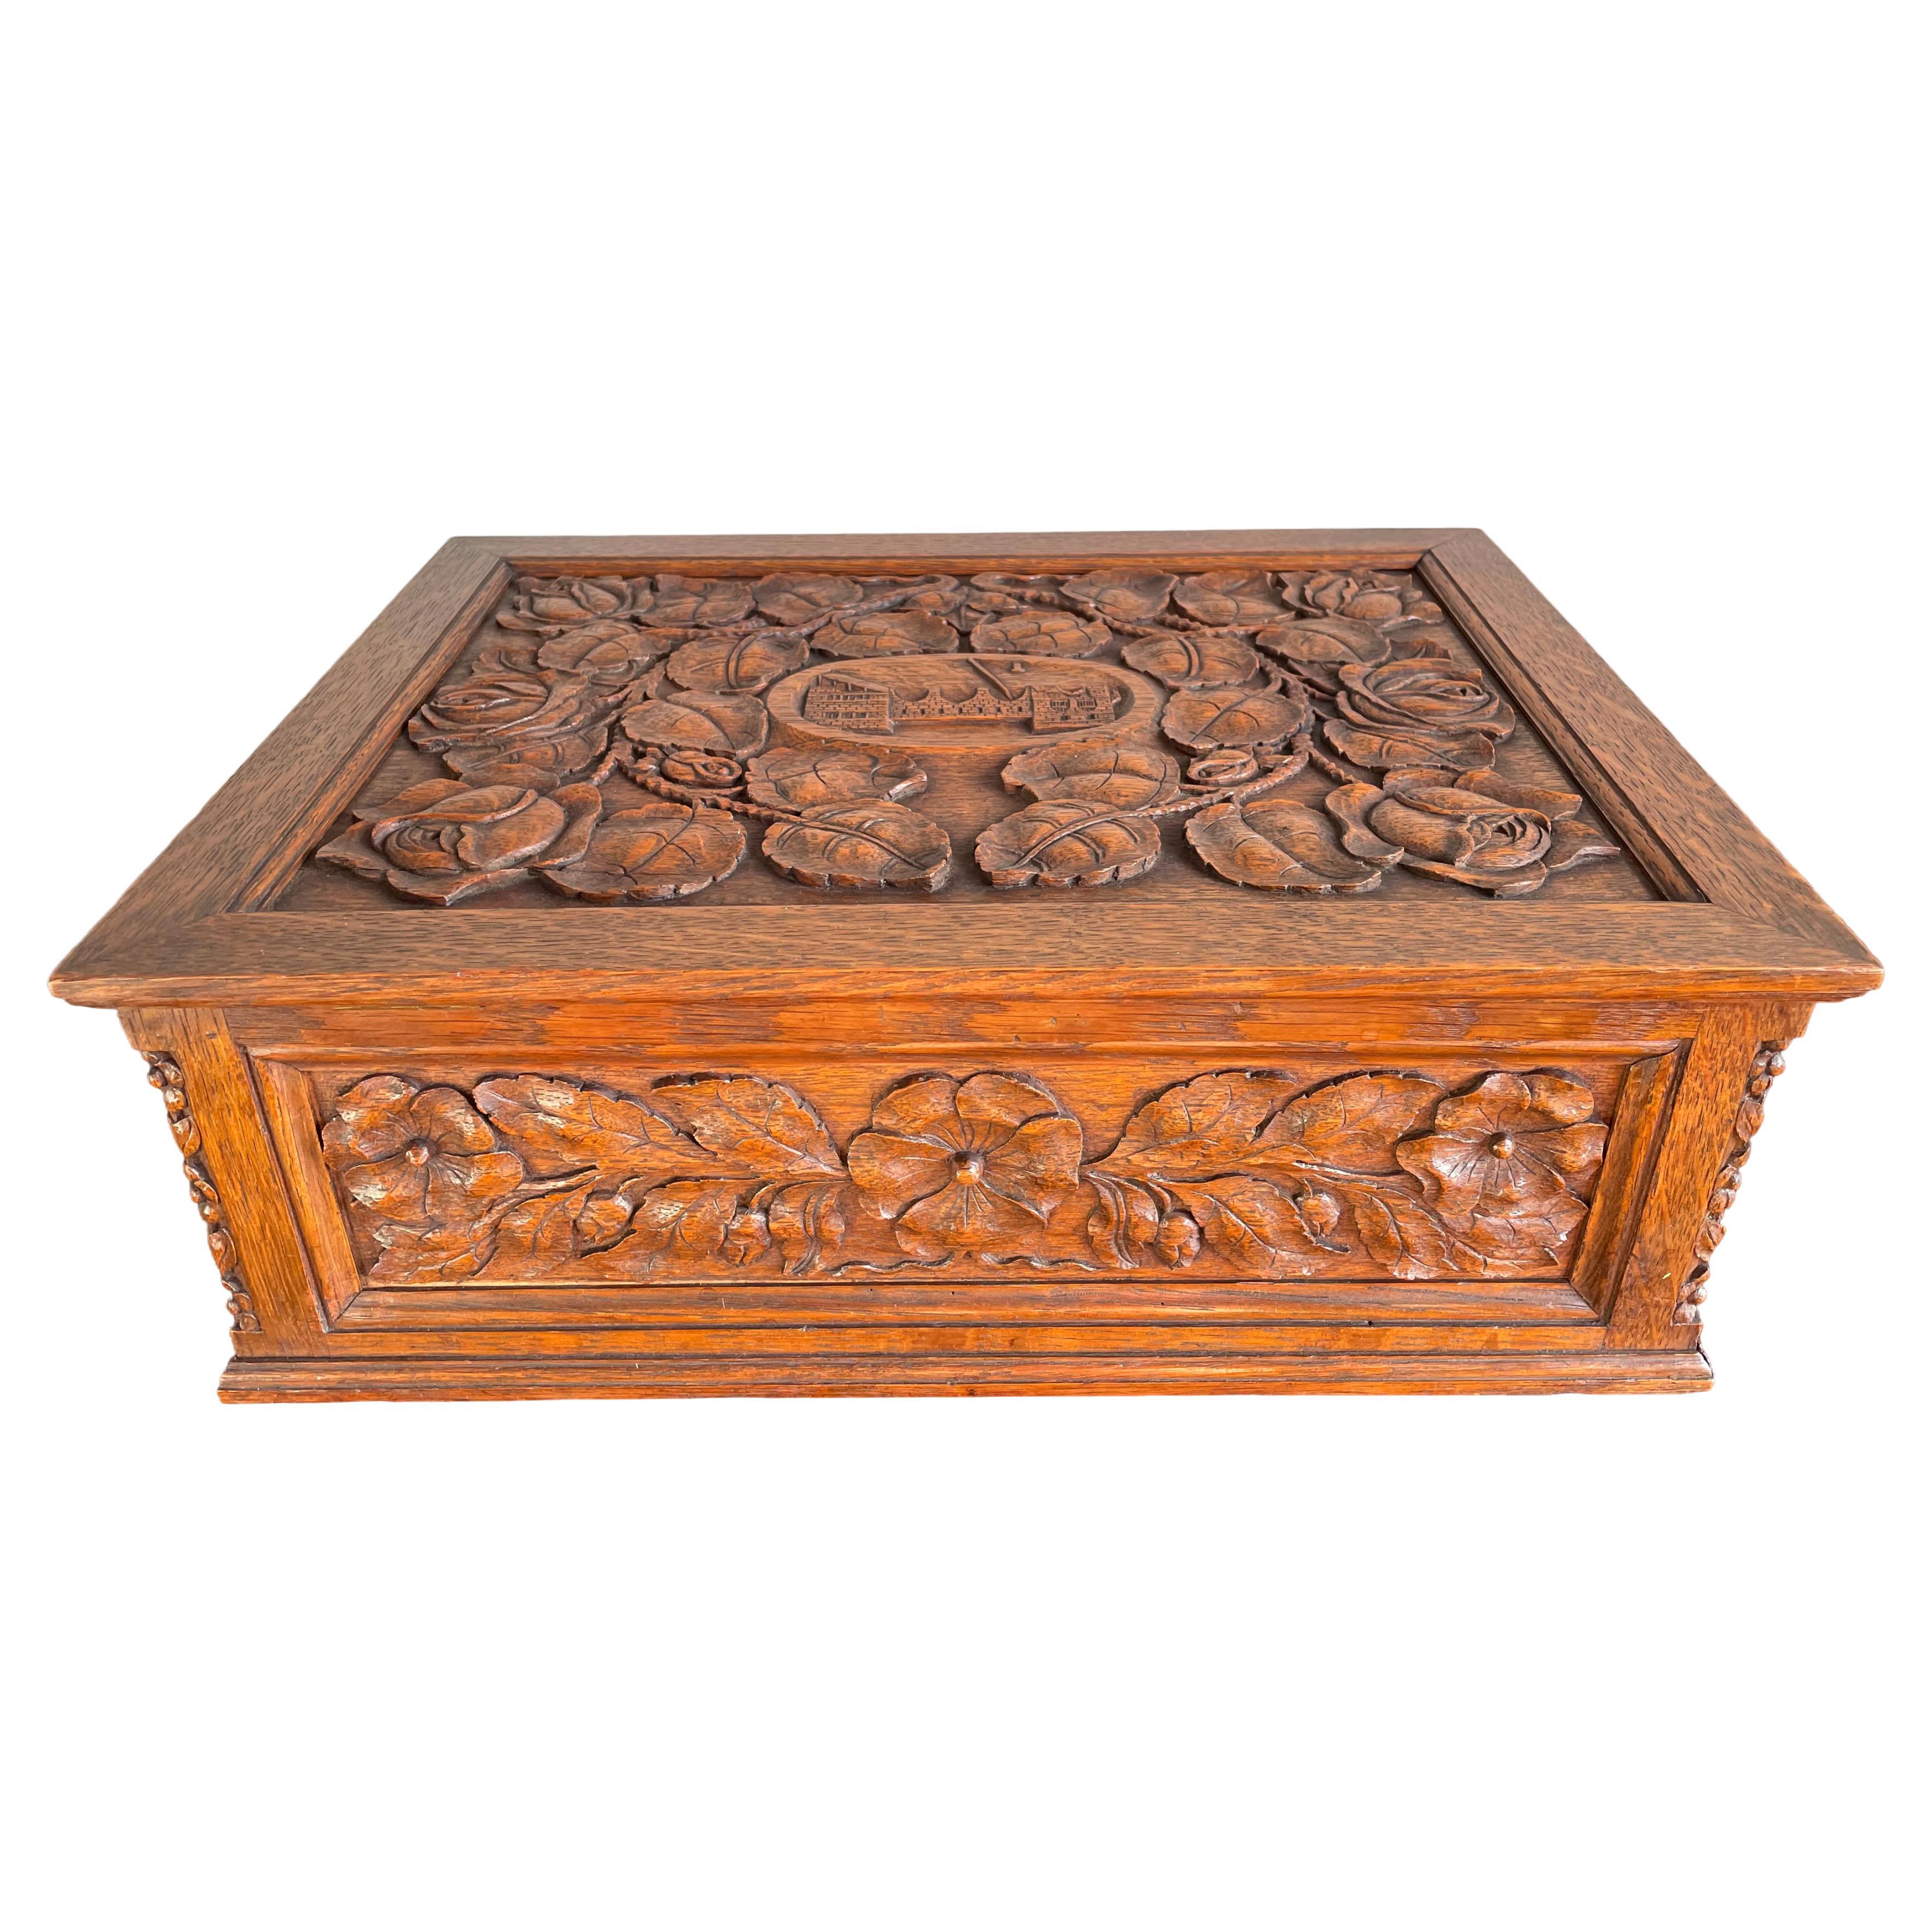 Museum Quality Carved Arts and Crafts Box w. Compartments, Rose Sculptures Etc. For Sale